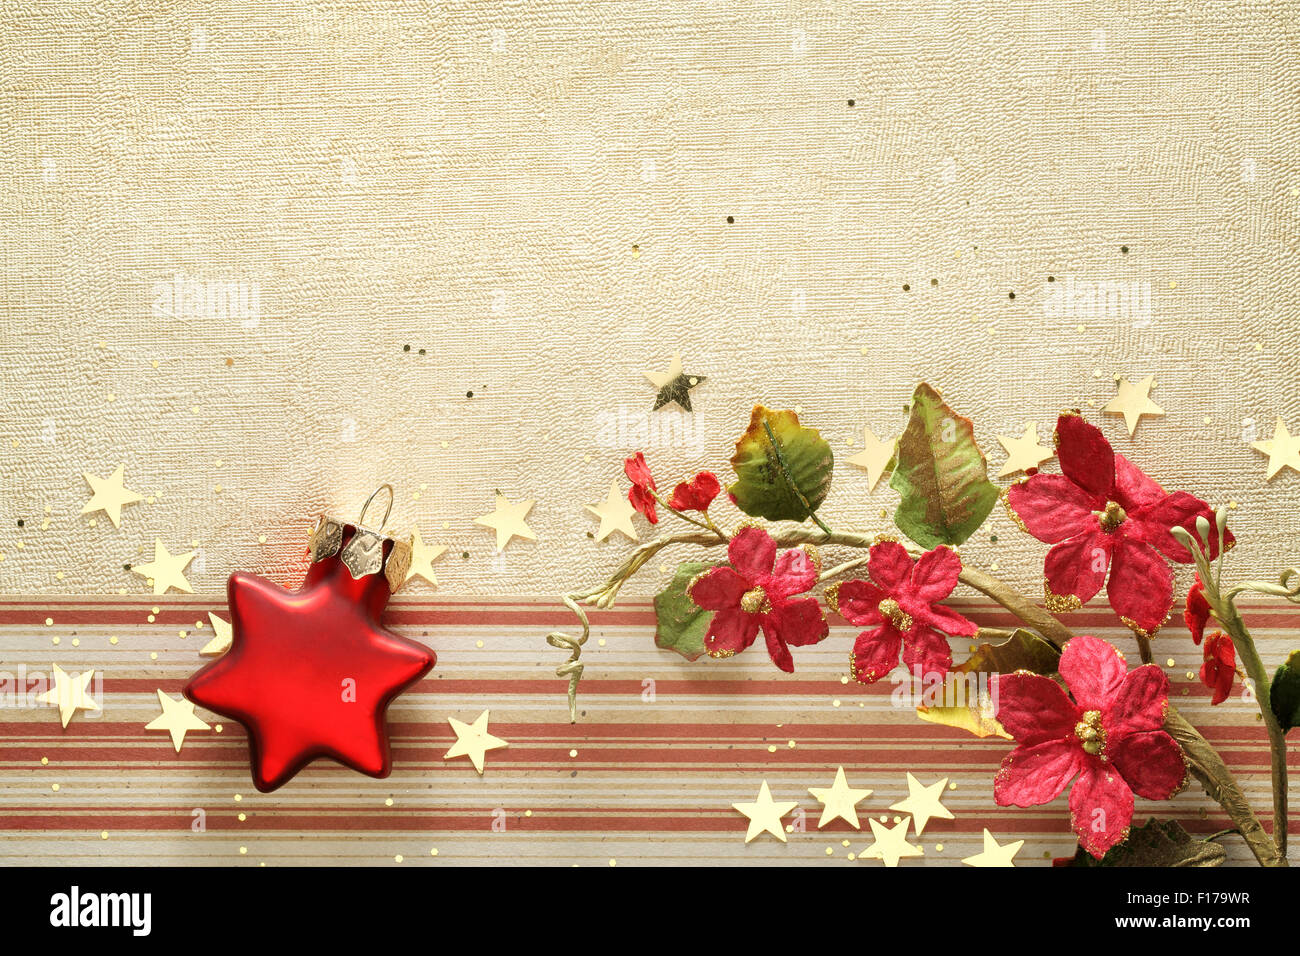 Christmas decorations on golden background Stock Photo